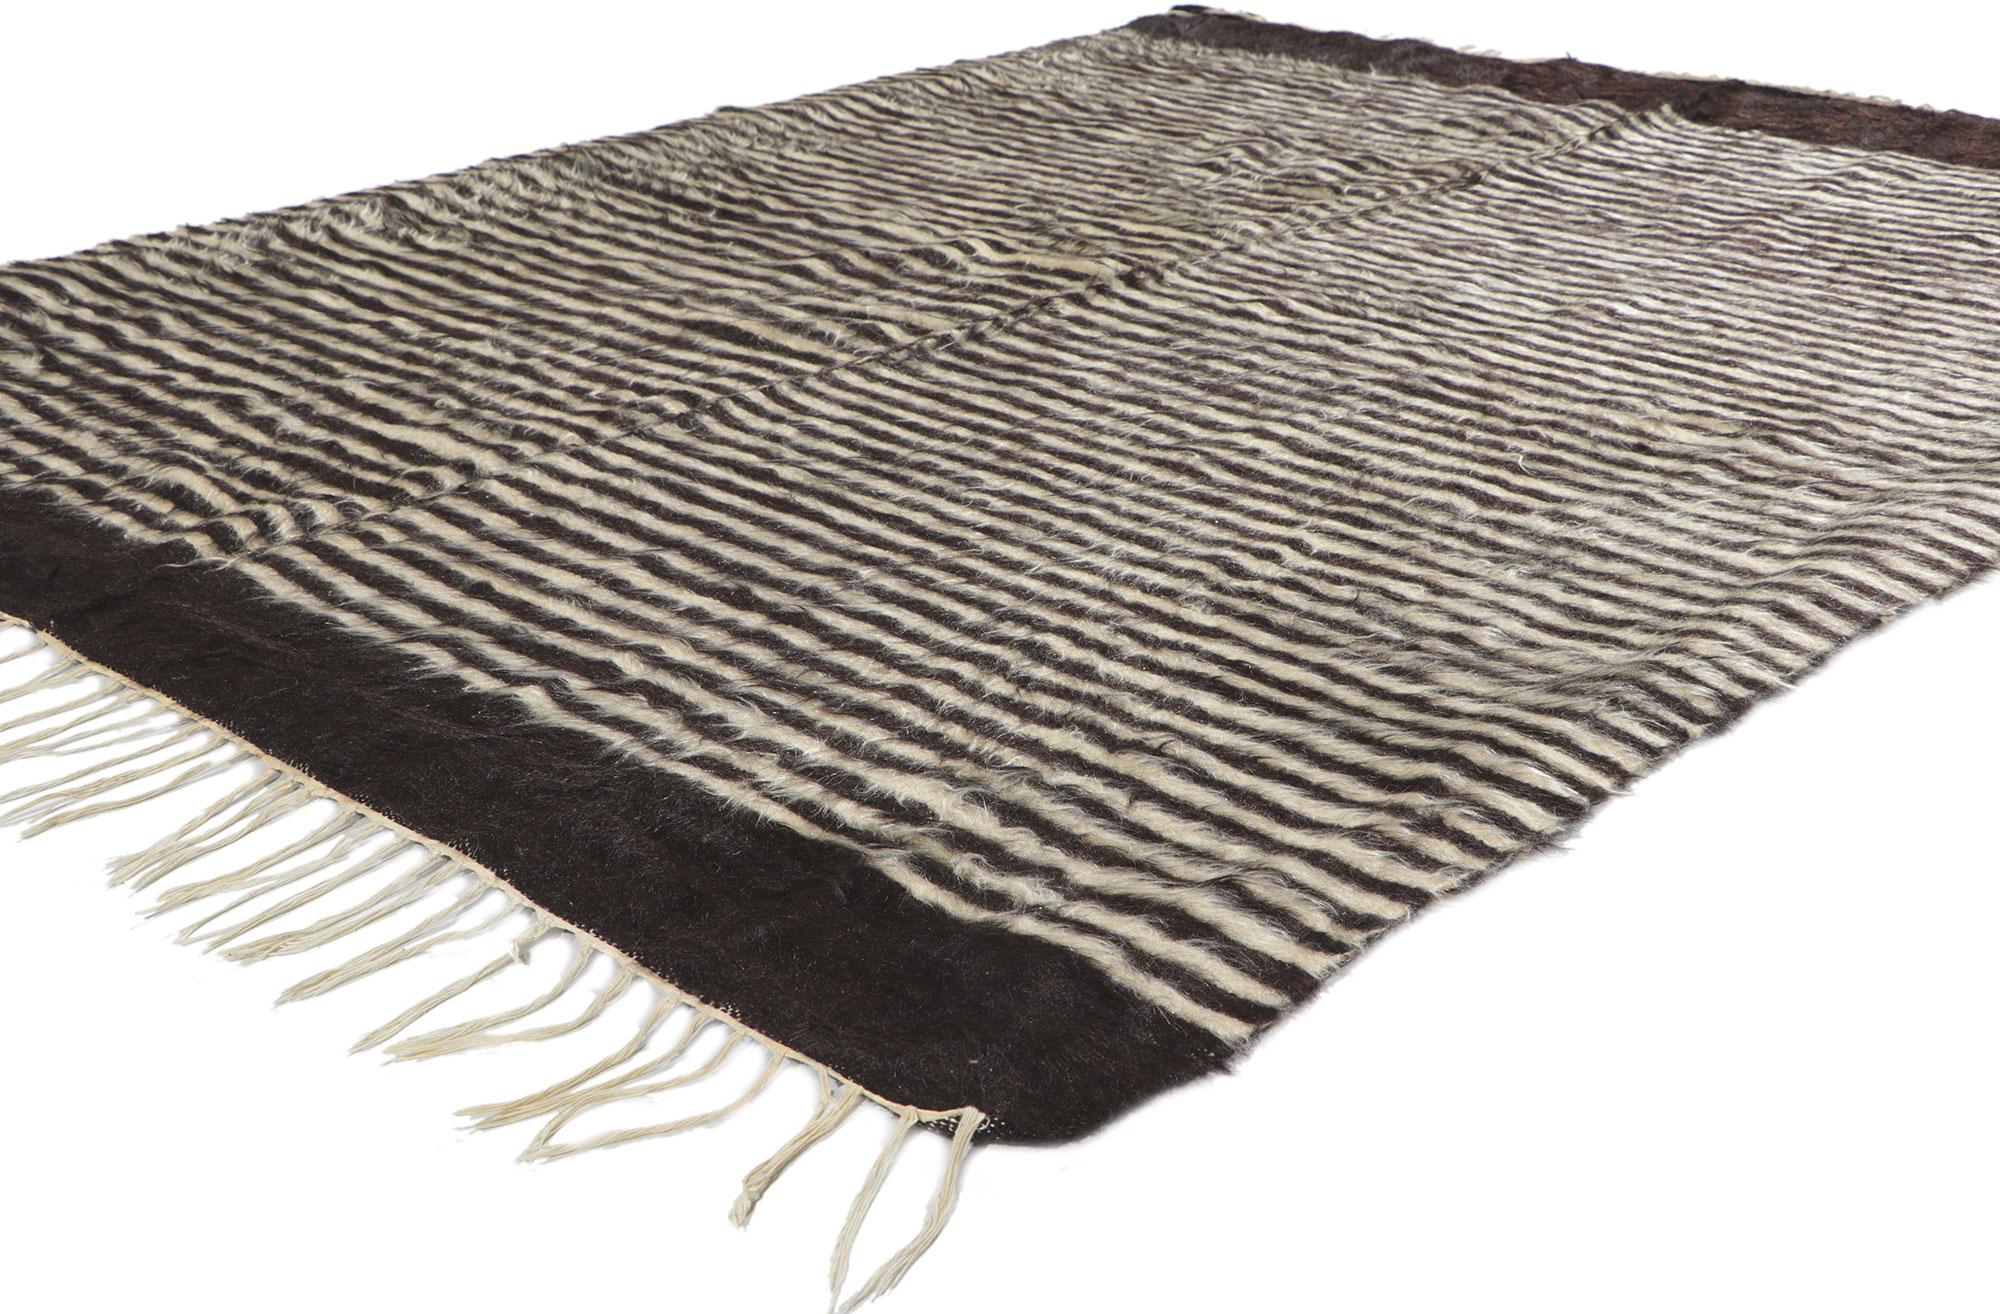 53860 Vintage Turkish Angora Wool Blanket Kilim Rug, 05'02 x 06'03. With its shaggy pile, incredible detail and texture, this handwoven Turkish angora kilim rug is a captivating vision of woven beauty. The eye-catching striped pattern and neutral